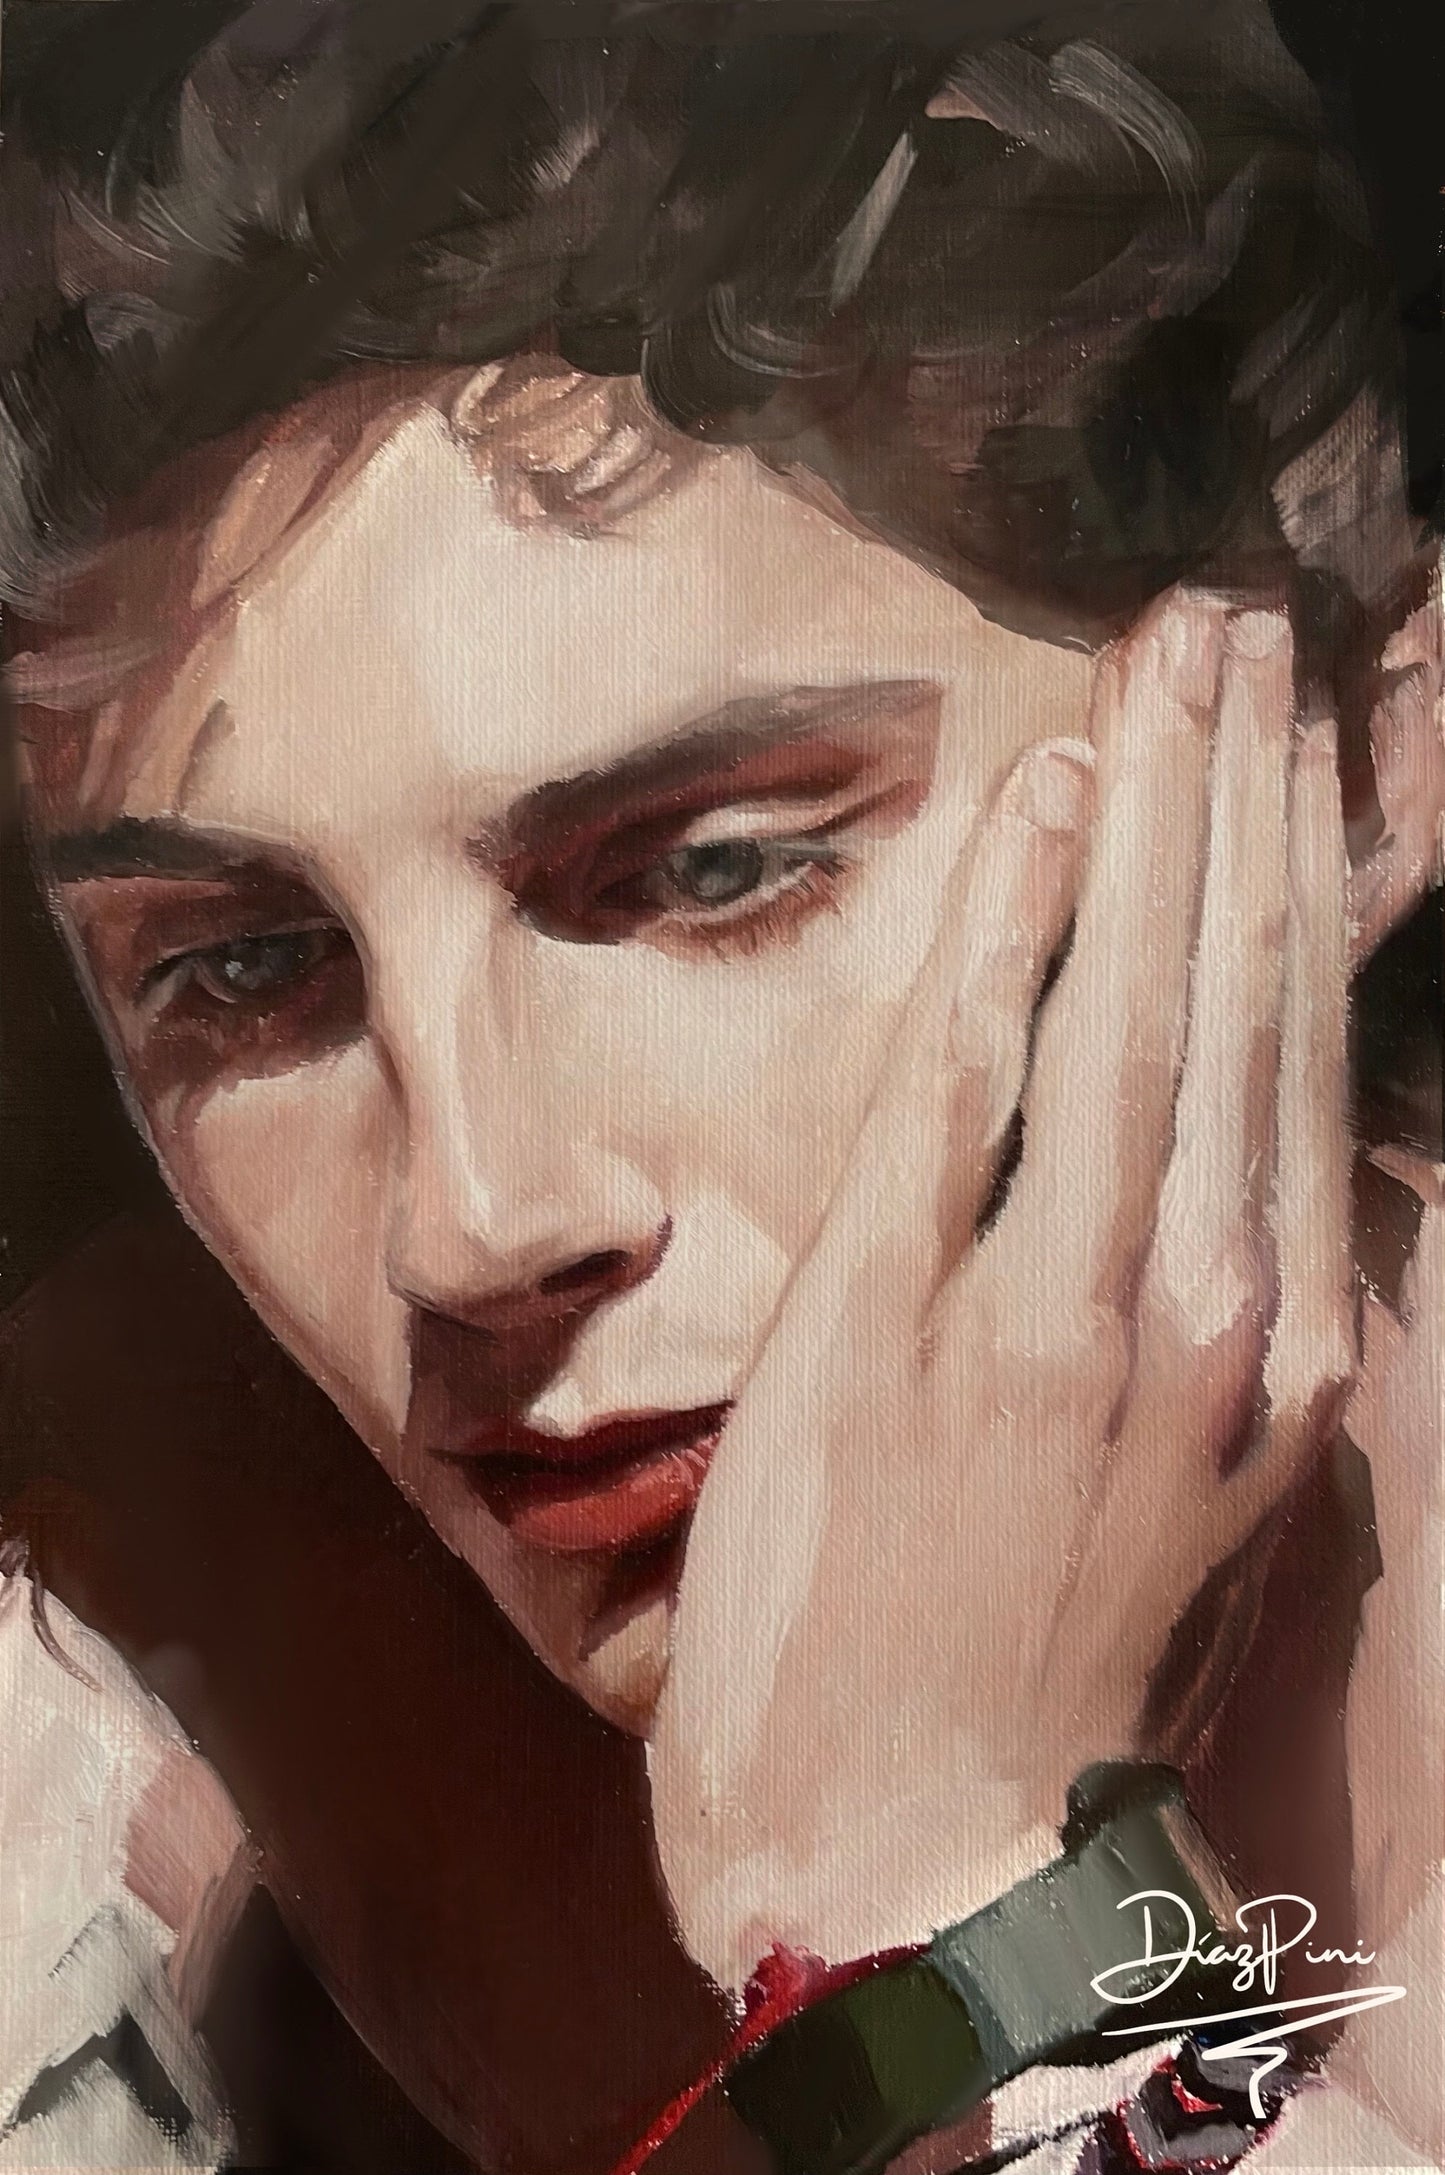 Timothee Chalamet Call me by your name Art Print from Original Oil painting